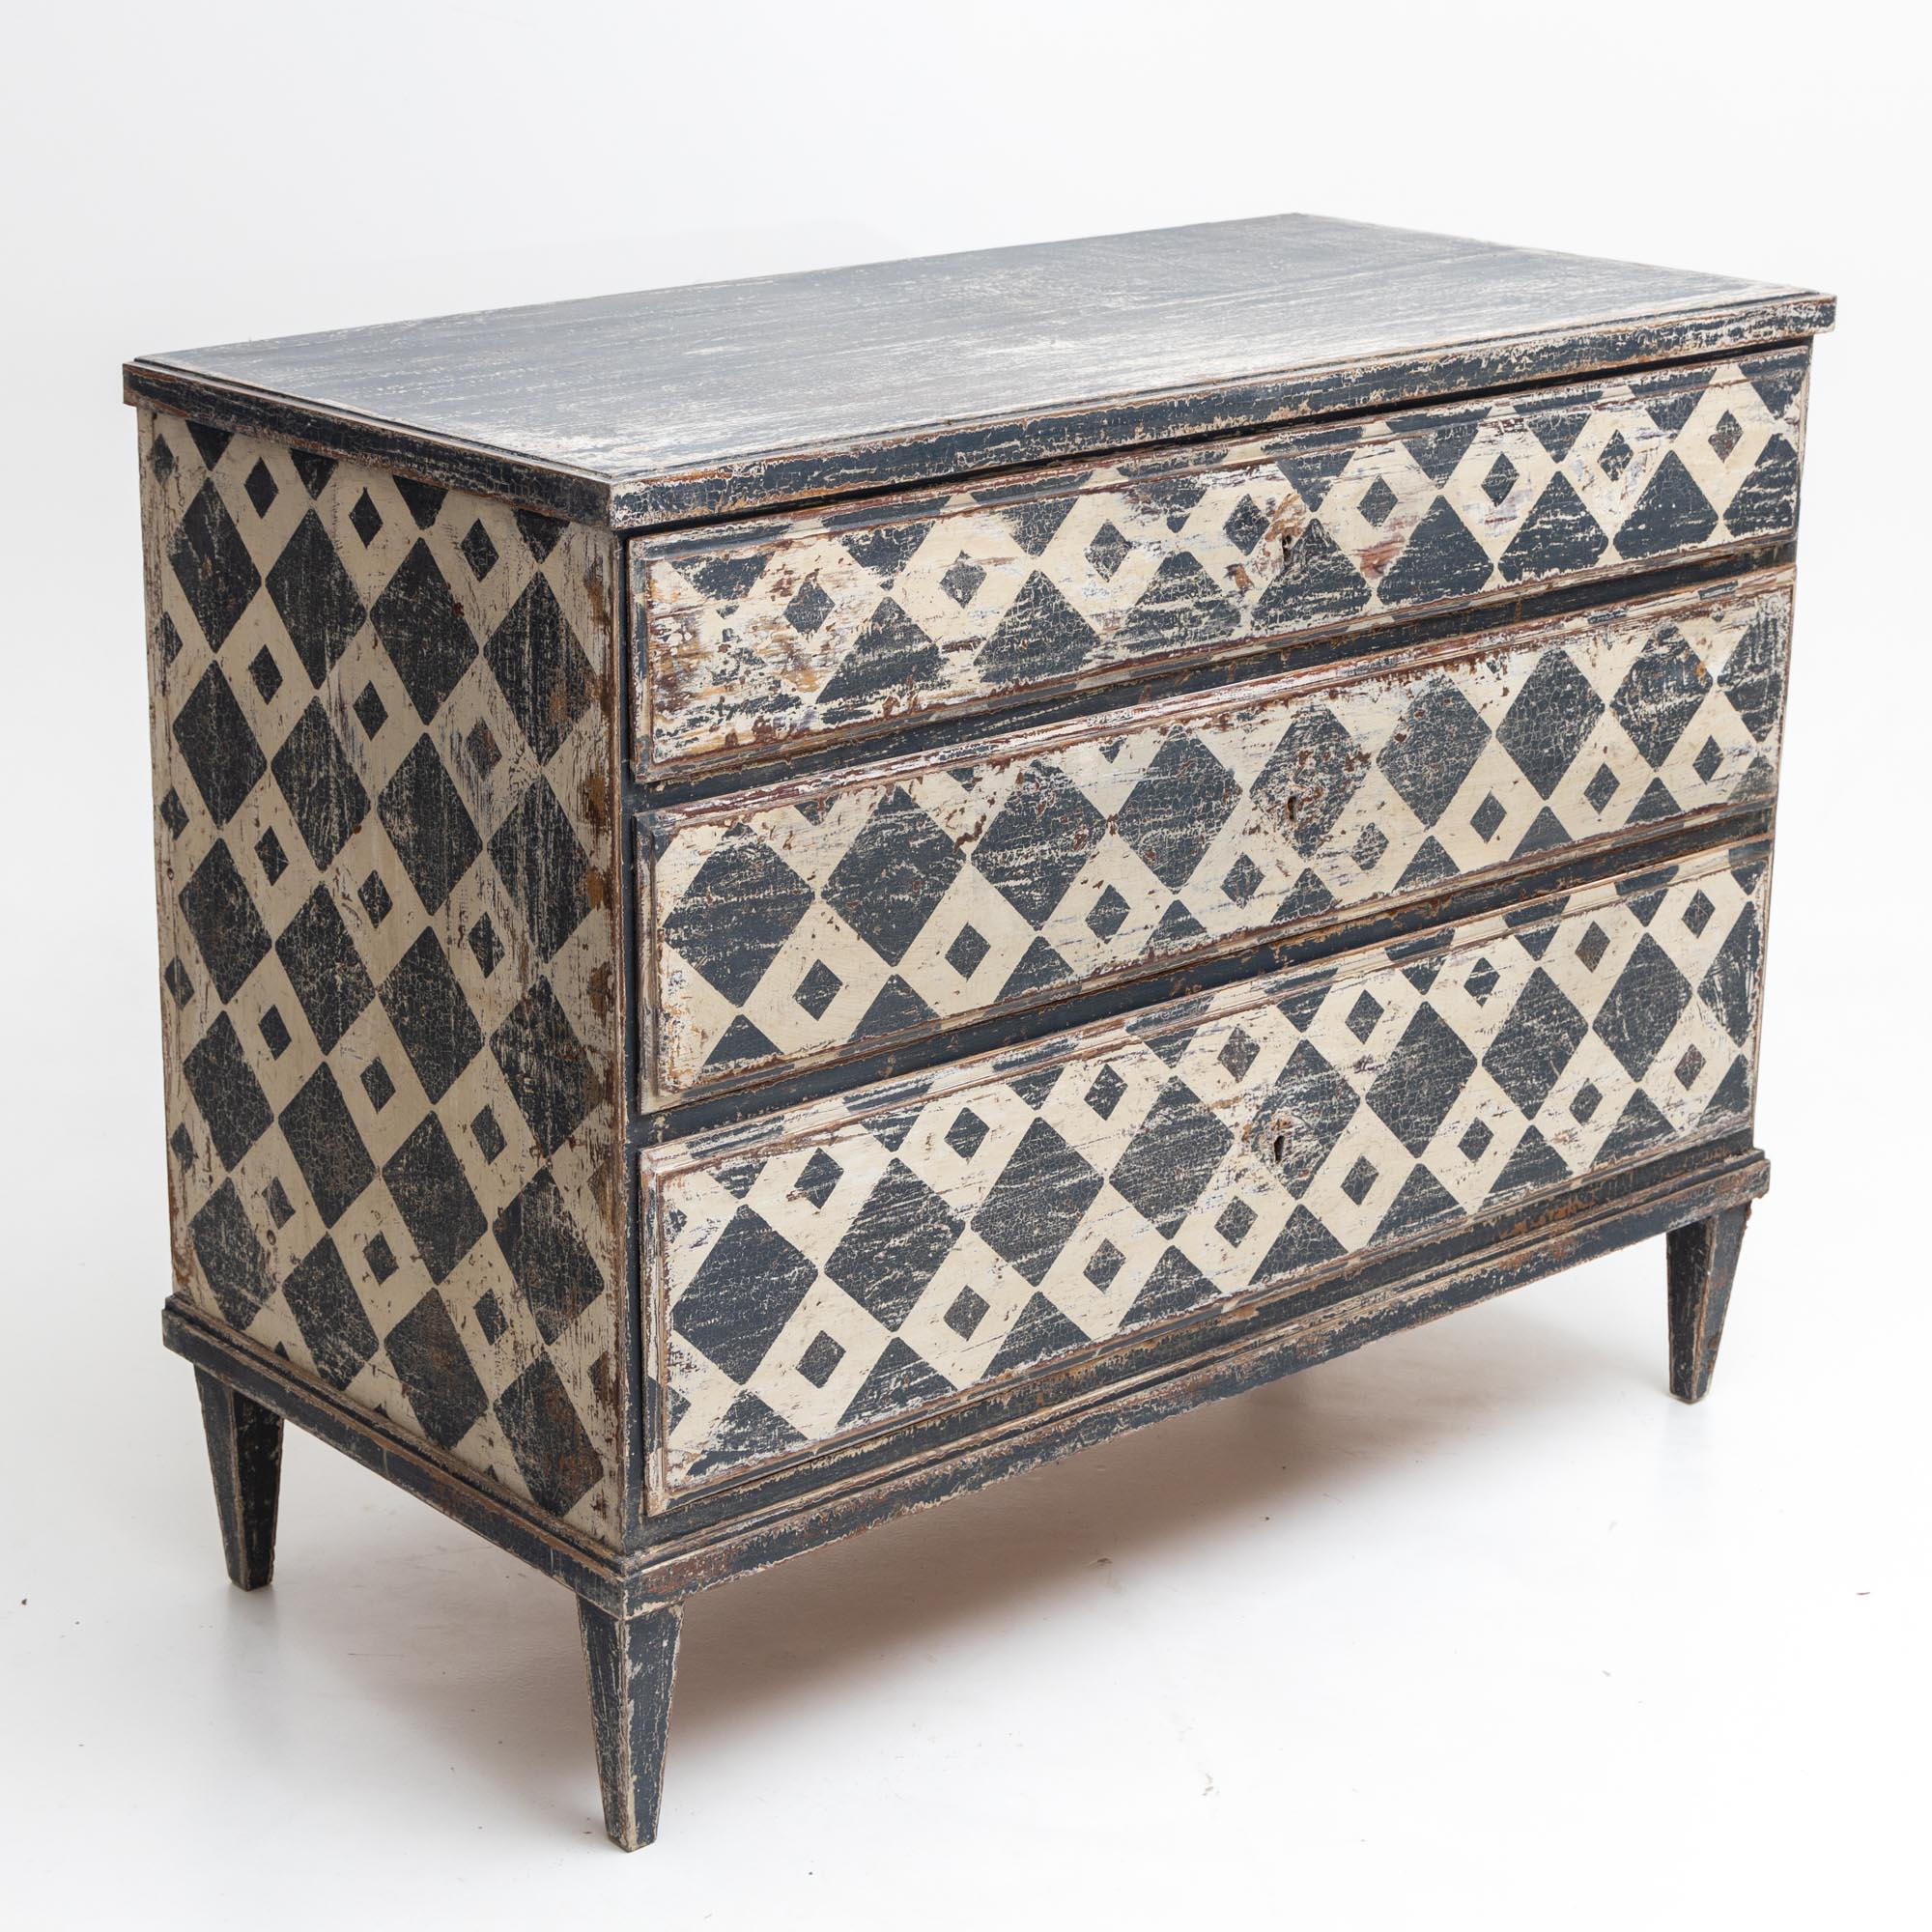 Wood Hand Painted Chest of Drawers with Harlequin Pattern, 19th Century